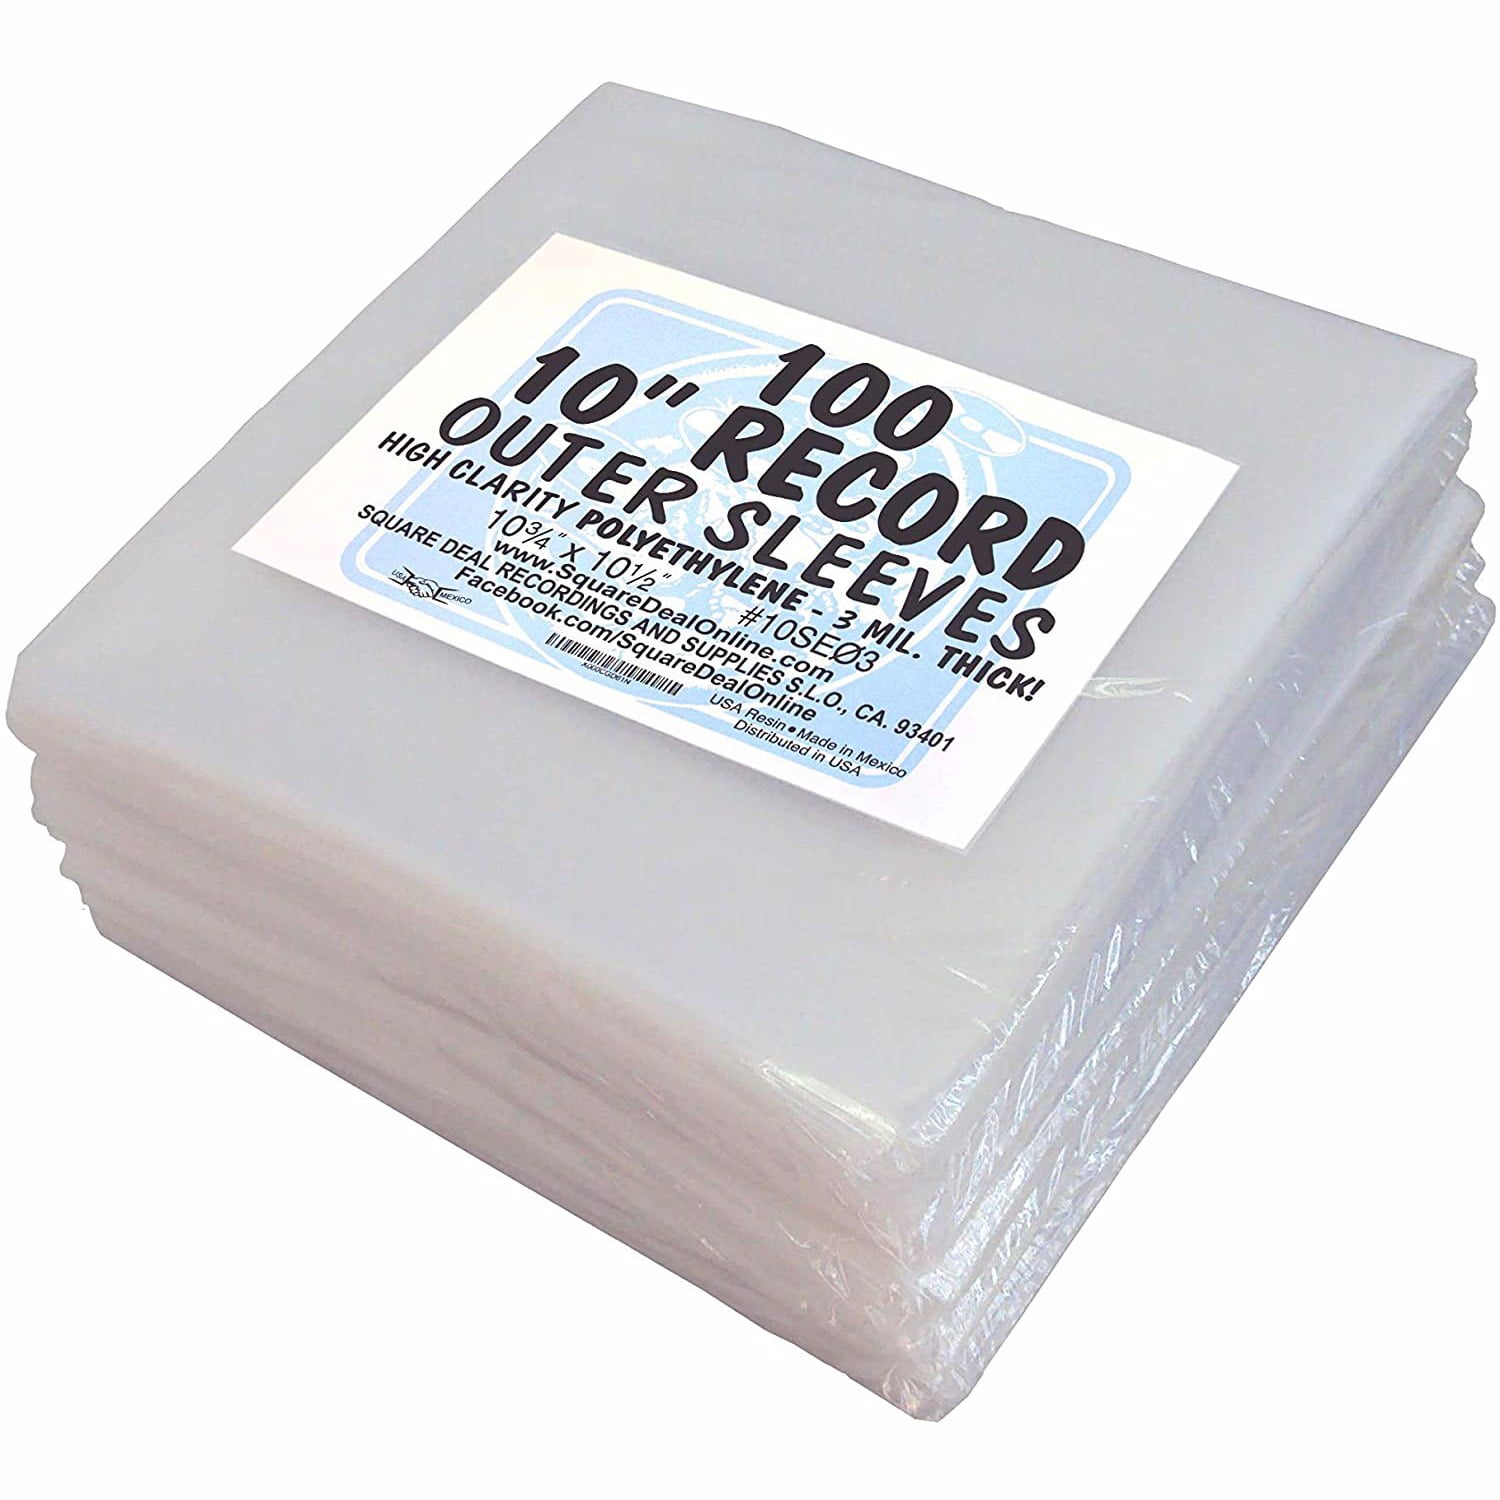 100 Plastic Outer Sleeves for 10 Vinyl Records #10SE03 - High Clarity -  Protect the Record Jacket & Protect Against Dust! 3 MIL THICK! (Albums /